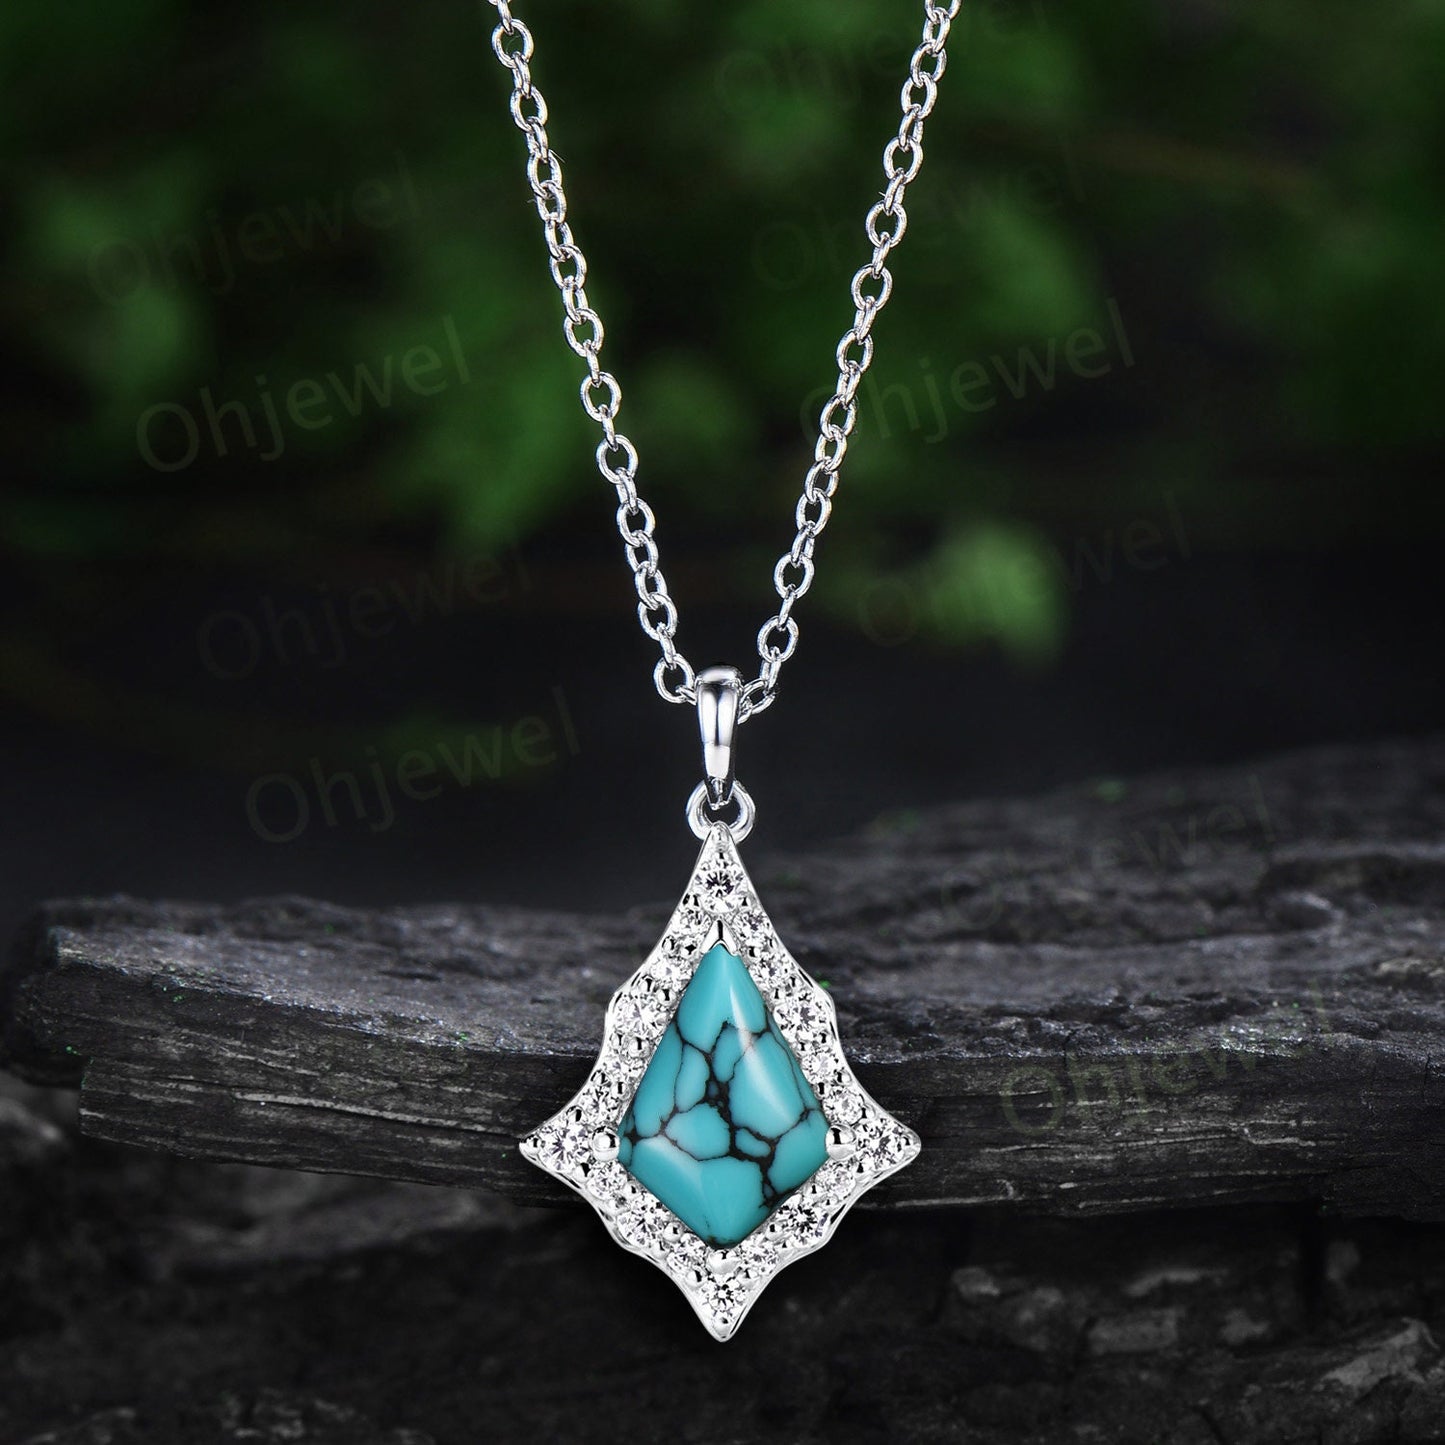 Vintage kite natural turquoise necklace 14k rose gold antique unique snowdrift halo diamond necklace Pendant women jewelry anniversary gift